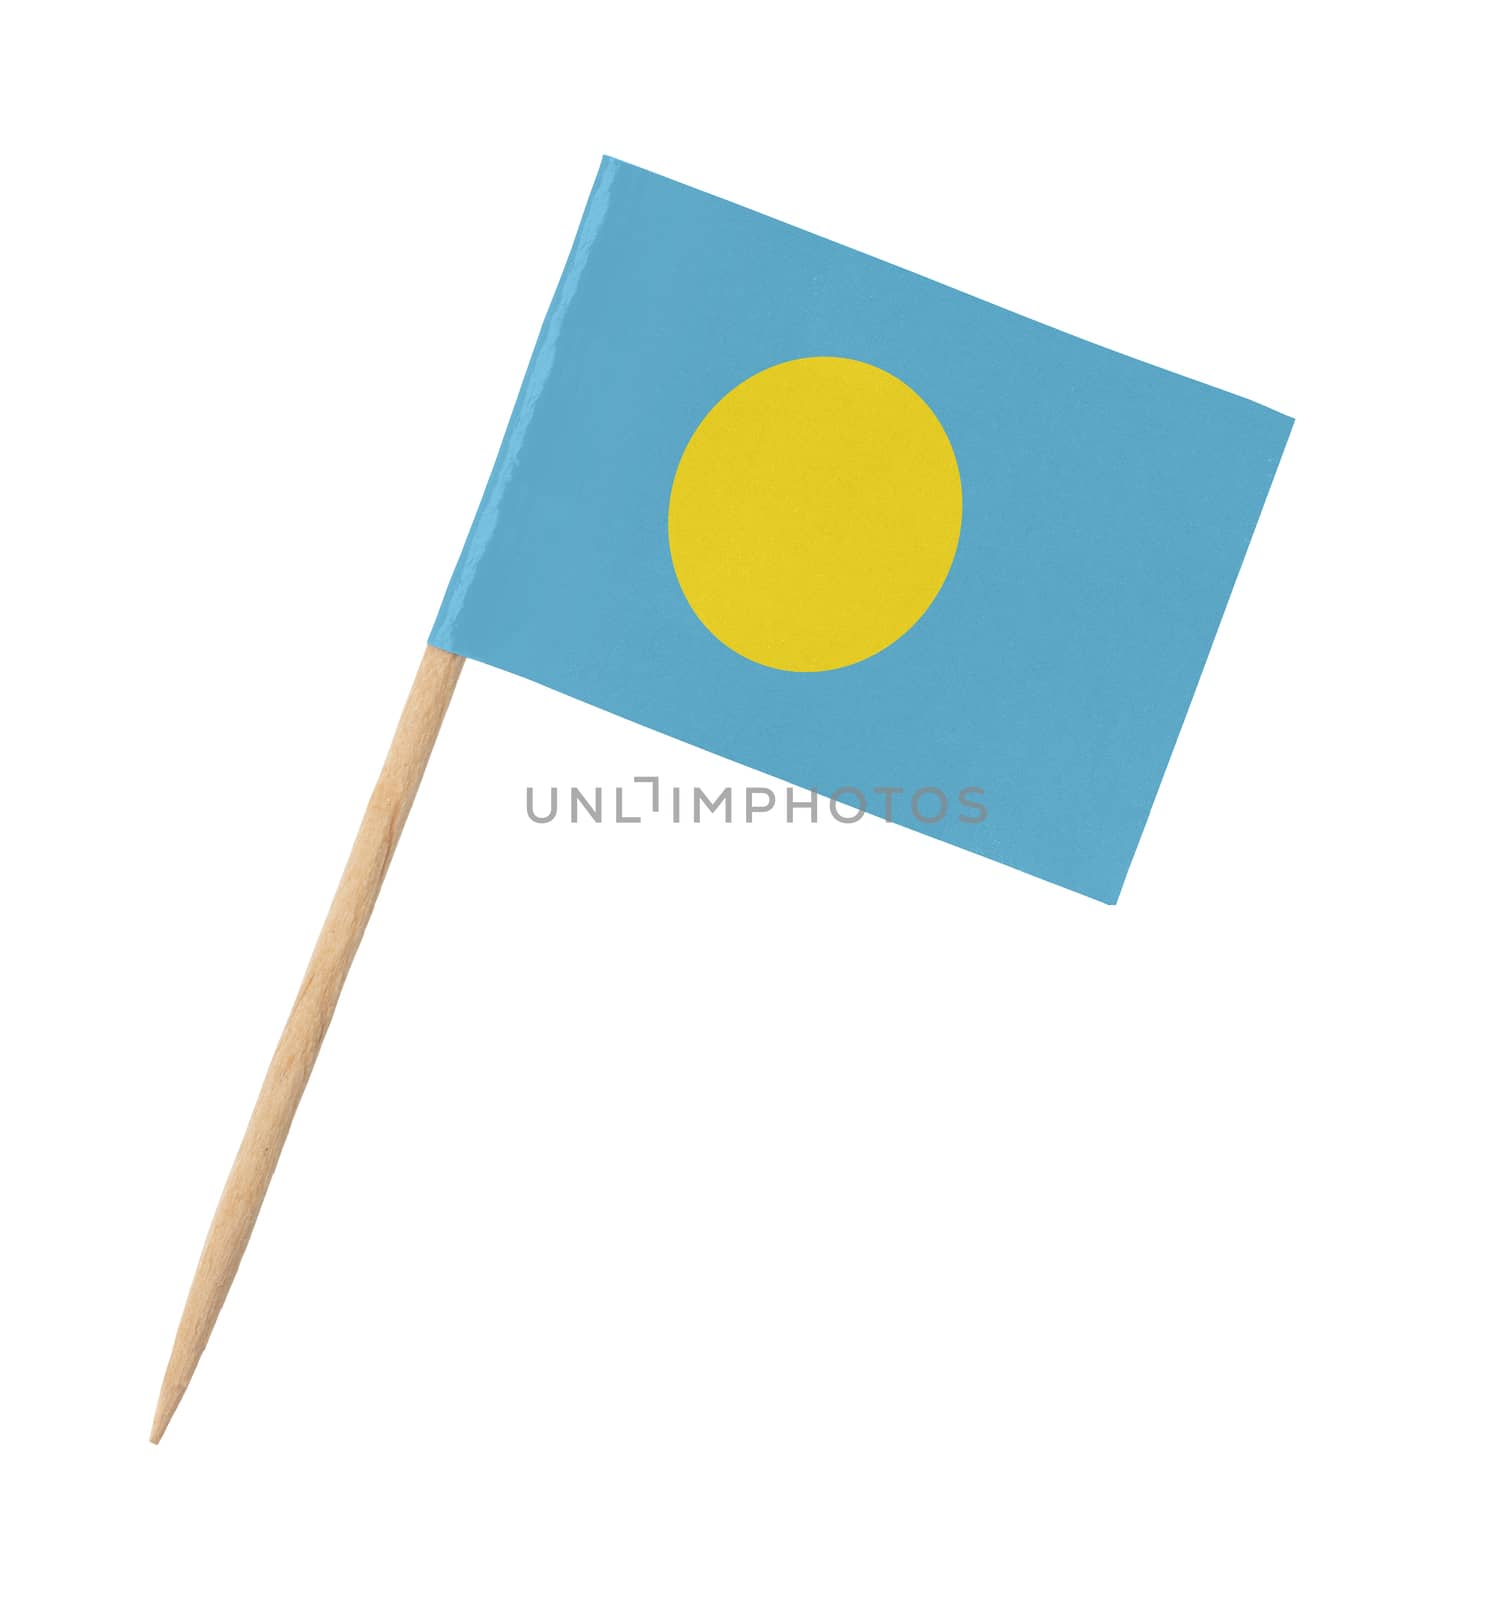 Small paper flag of Palau on wooden stick by michaklootwijk